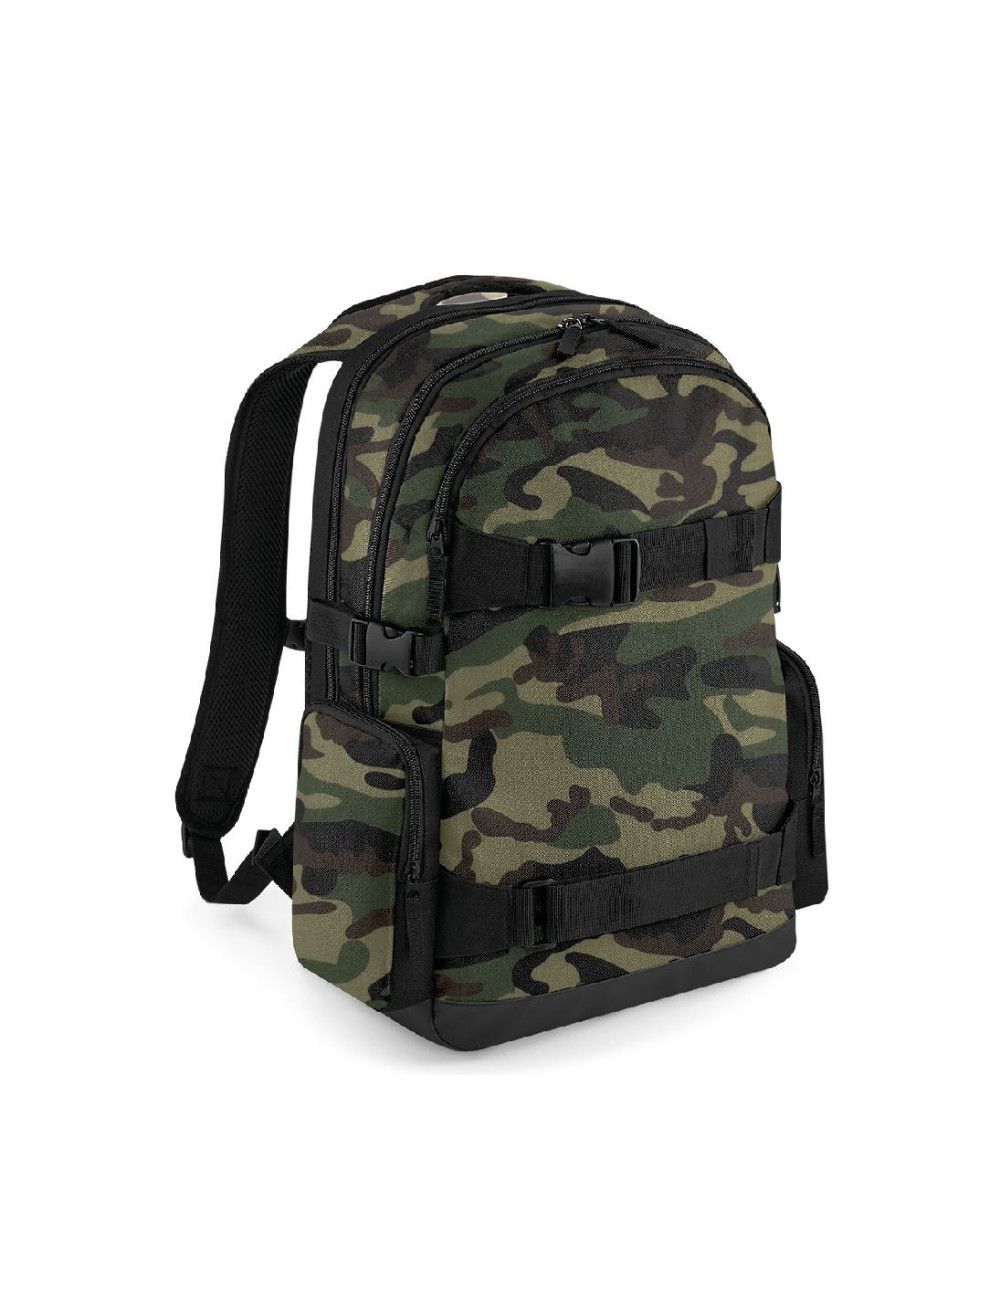 Bagbase BG853 - Sac à dos old school Taille:0 Couleurs:Jungle Camo